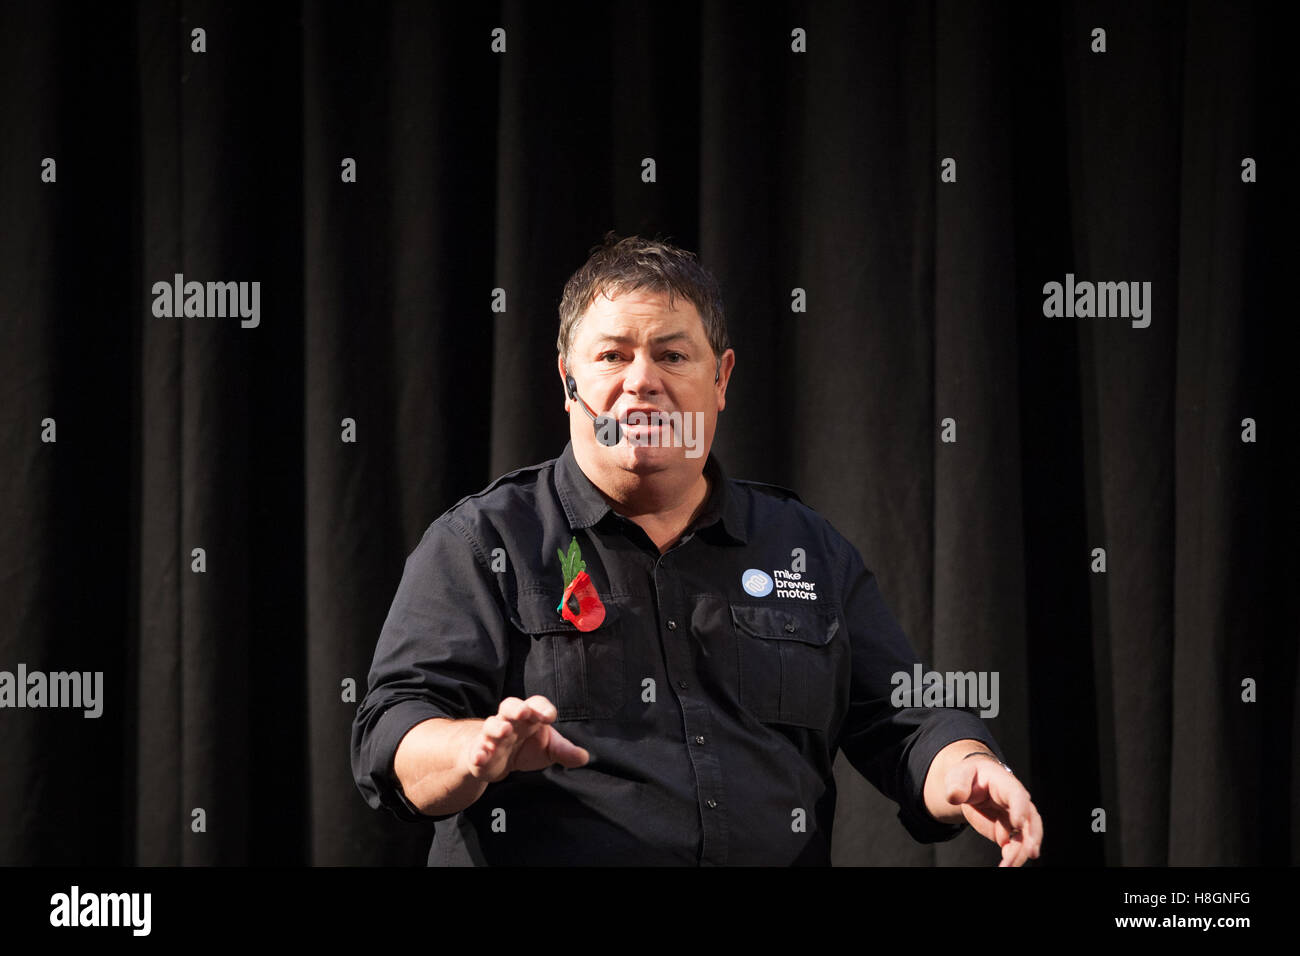 Birmingham, UK. 12th November, 2016. Classic Motor Show 2016 at NEC in Birmingham. Mike Brewer on the Live Wheeler Dealer stage talking to the public Credit:  steven roe/Alamy Live News Stock Photo